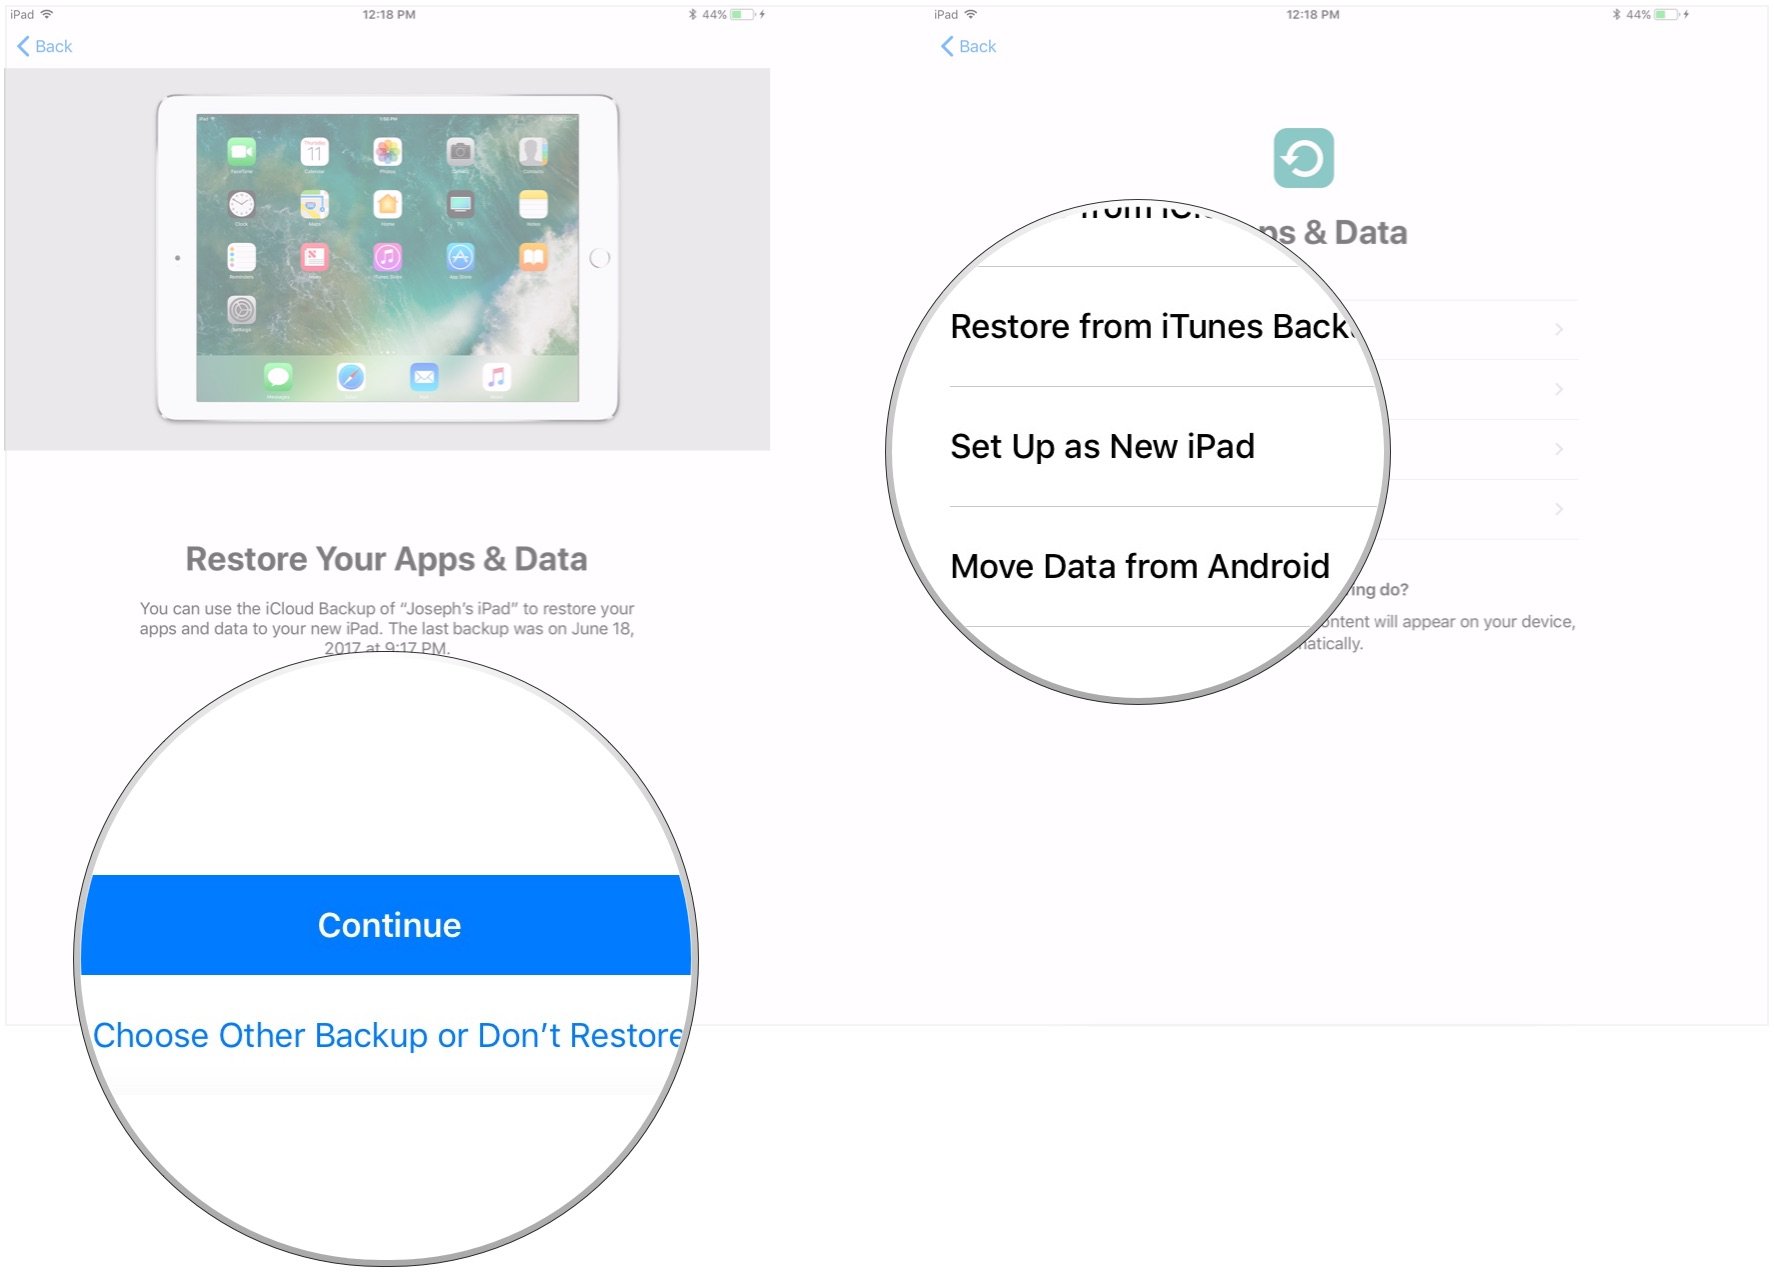 Use Automatic Setup to transfer data to new iPad by showing steps: Choose if you want to restore device